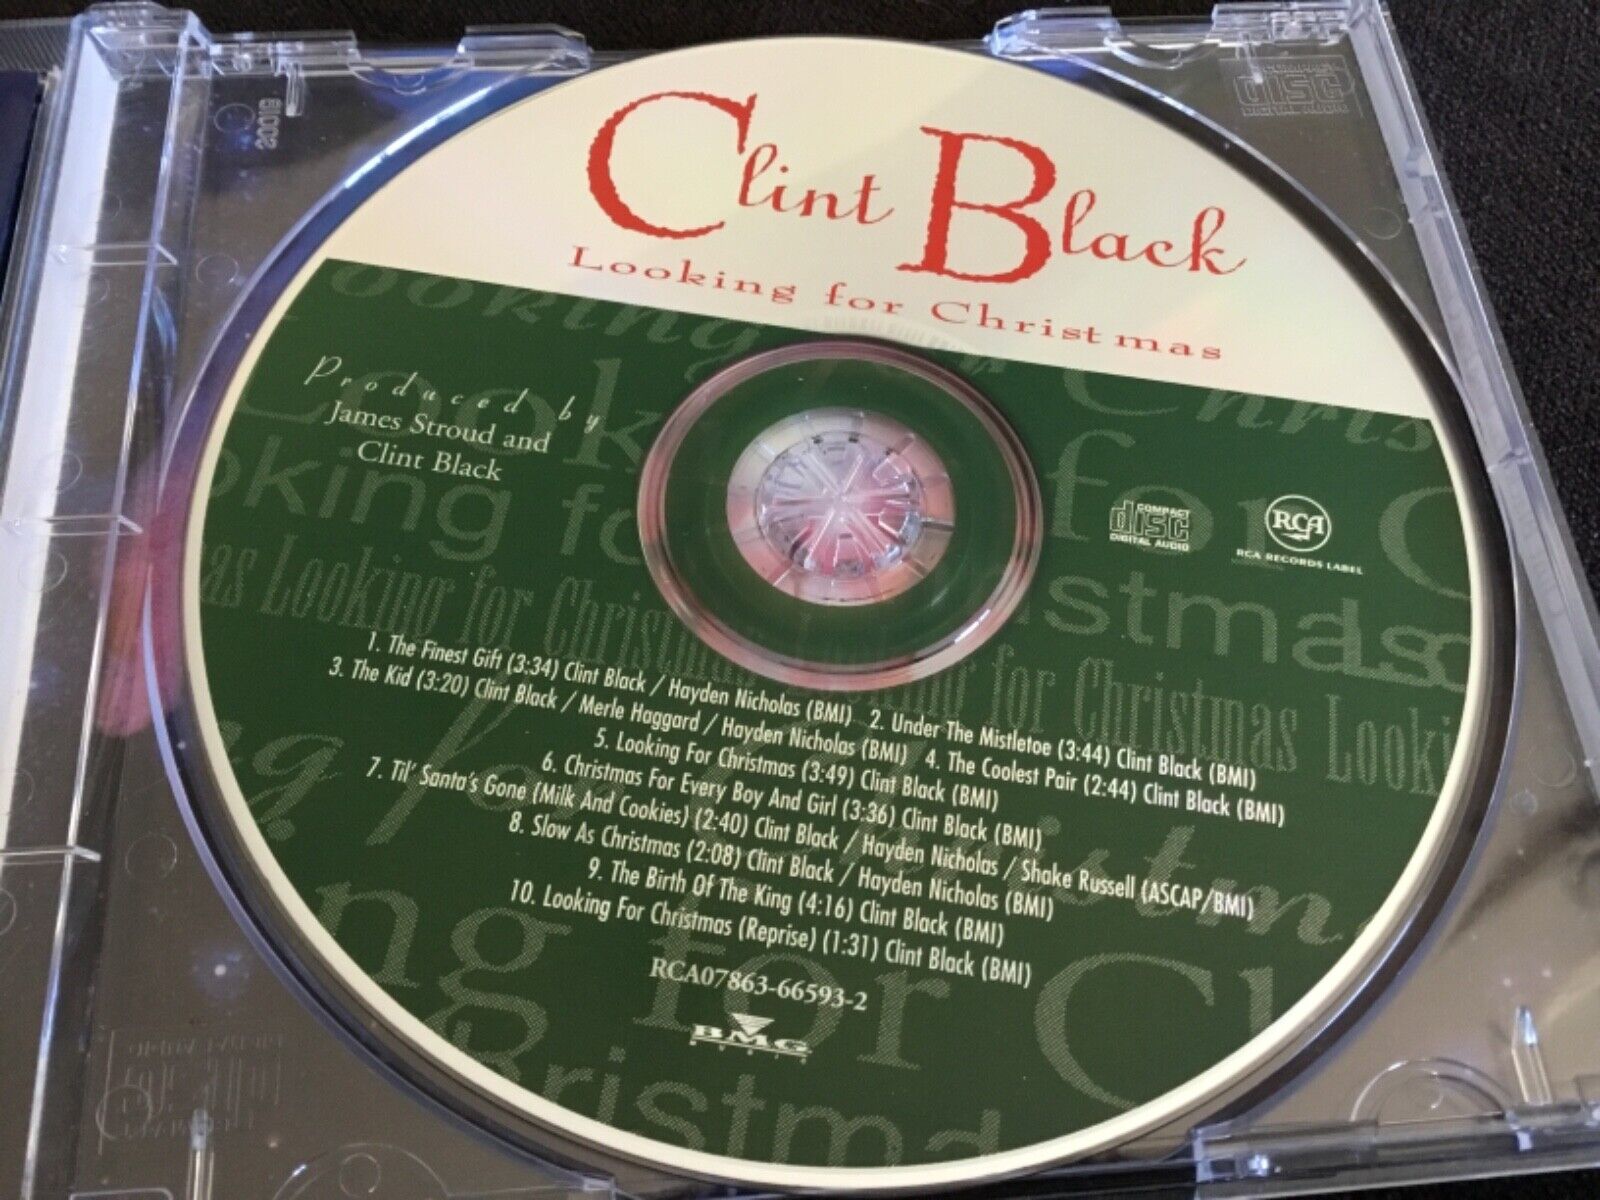 Looking for Christmas - Audio CD By Clint Black - DISC ONLY-